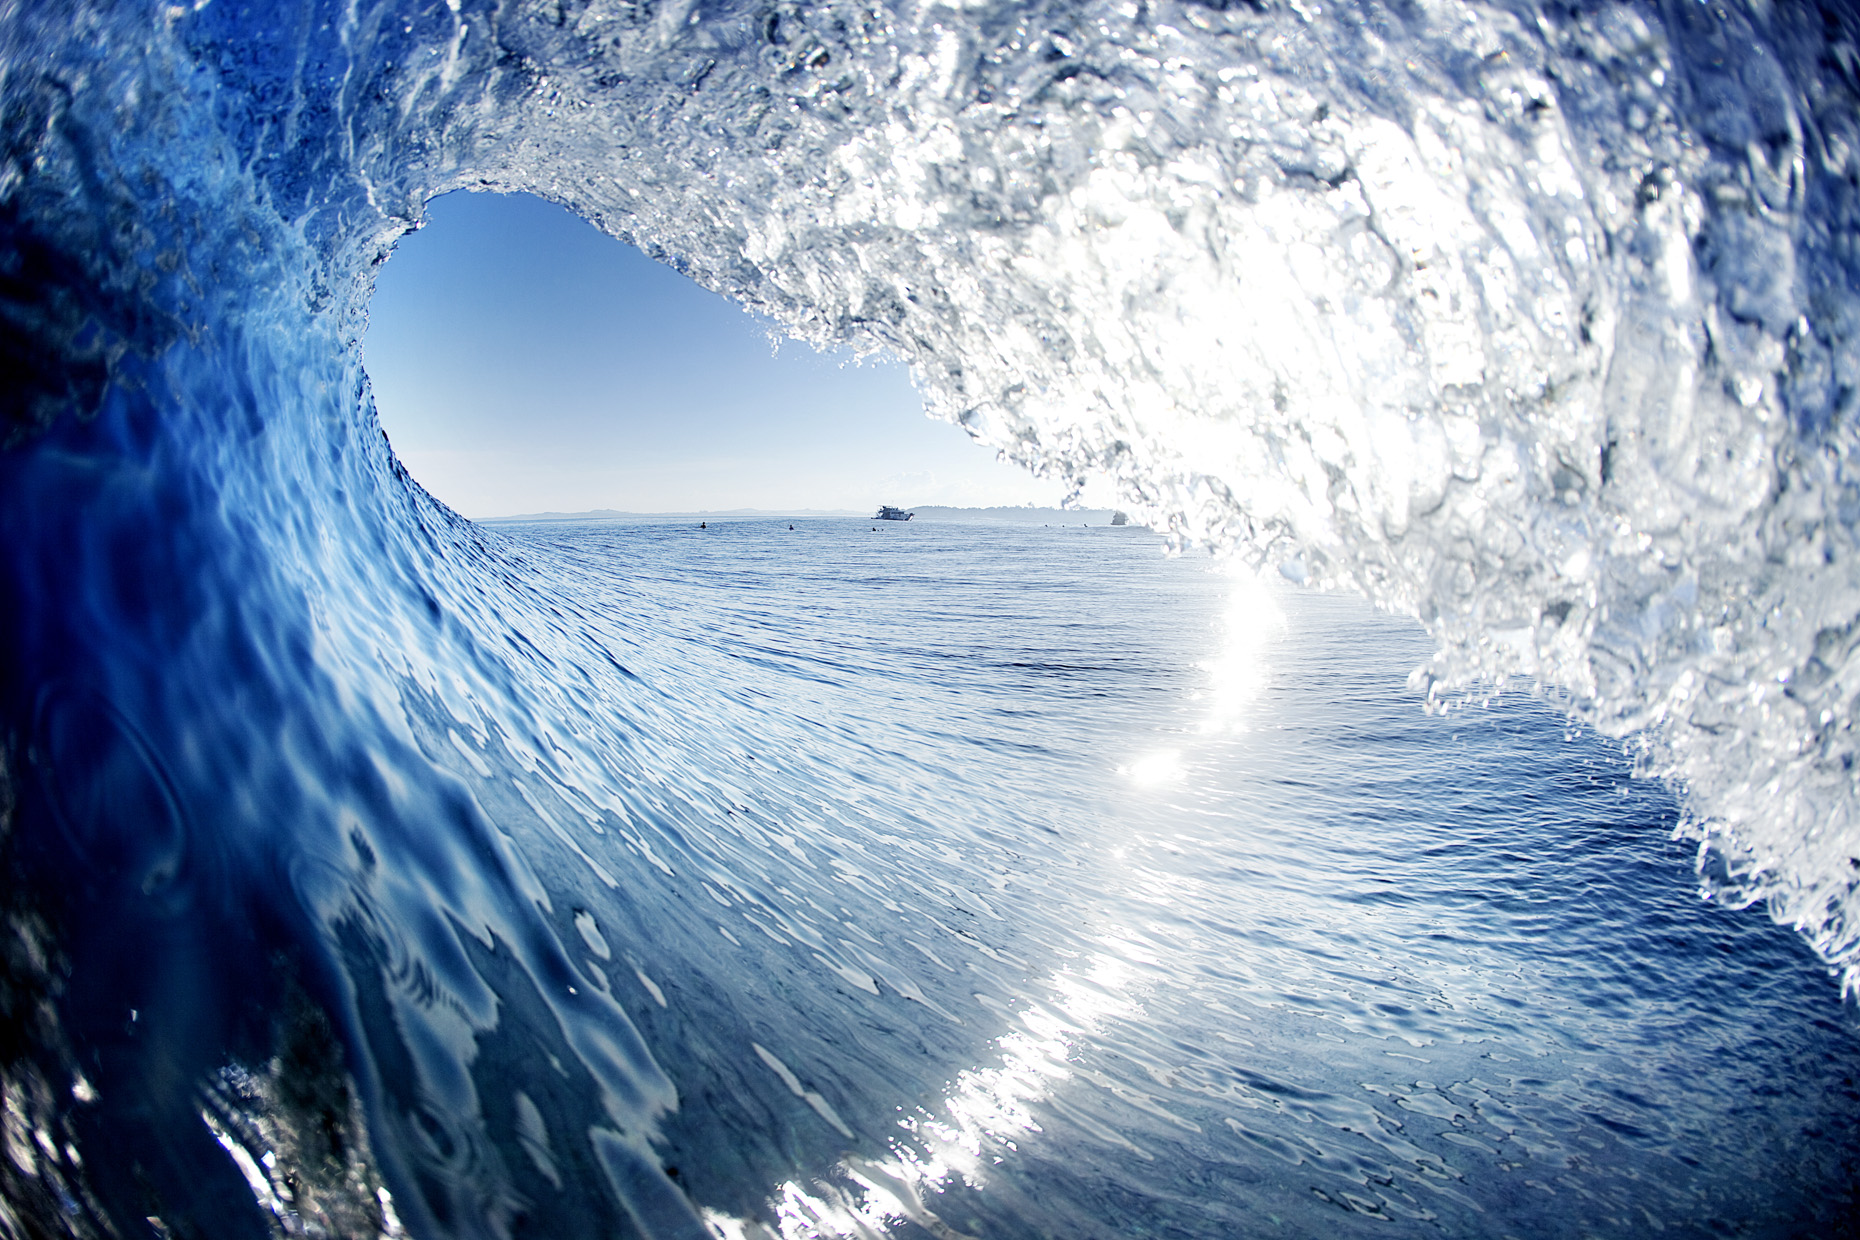 barreling wave POV by New Hampshire based commercial outdoor lifestyle photographer Brian Nevins